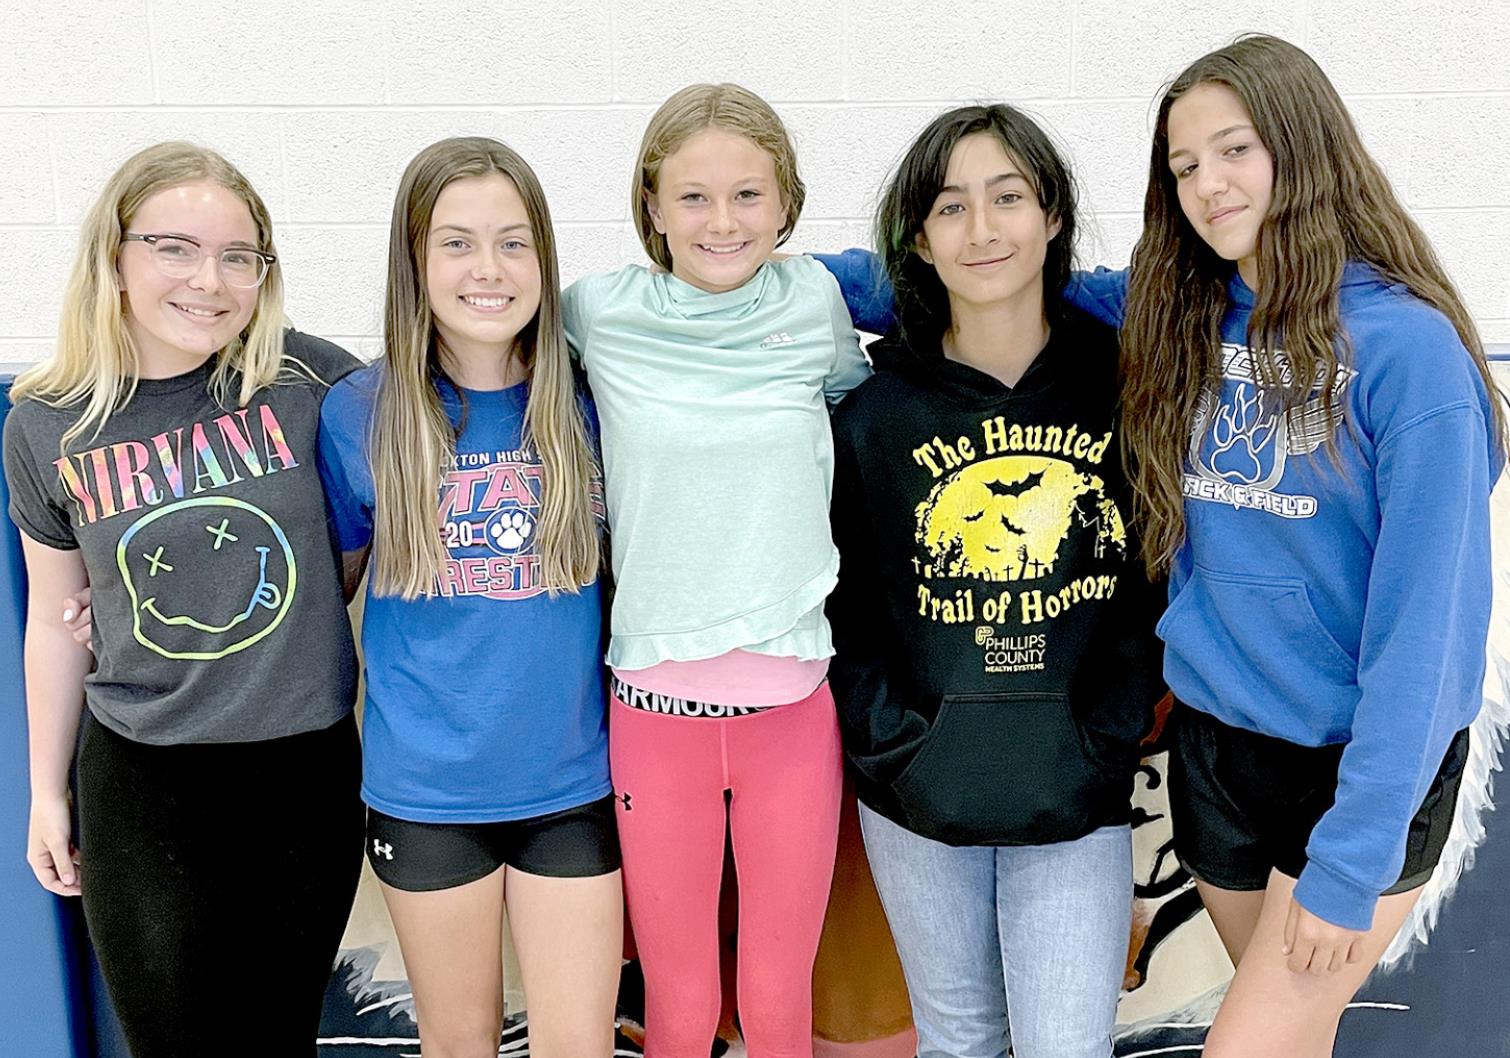 THE STOCKTON JUNIOR HIGH SEVENTH-GRADE GIRLS placing at the MCEL Track Meet were, from left: Lyric Snyder (4 x 200M Relay), Camille Lowry (4 x 100M Relay, 4 x 200M Relay), Teagann Shamburg (4 x 100M Relay), Jayana Creighton (100M, 200M, 4 x 100M Relay, 4 x 200M Relay), and Reese Taylor (4 x 100M Relay, 4 x 200M Relay). (Courtesy Photo)